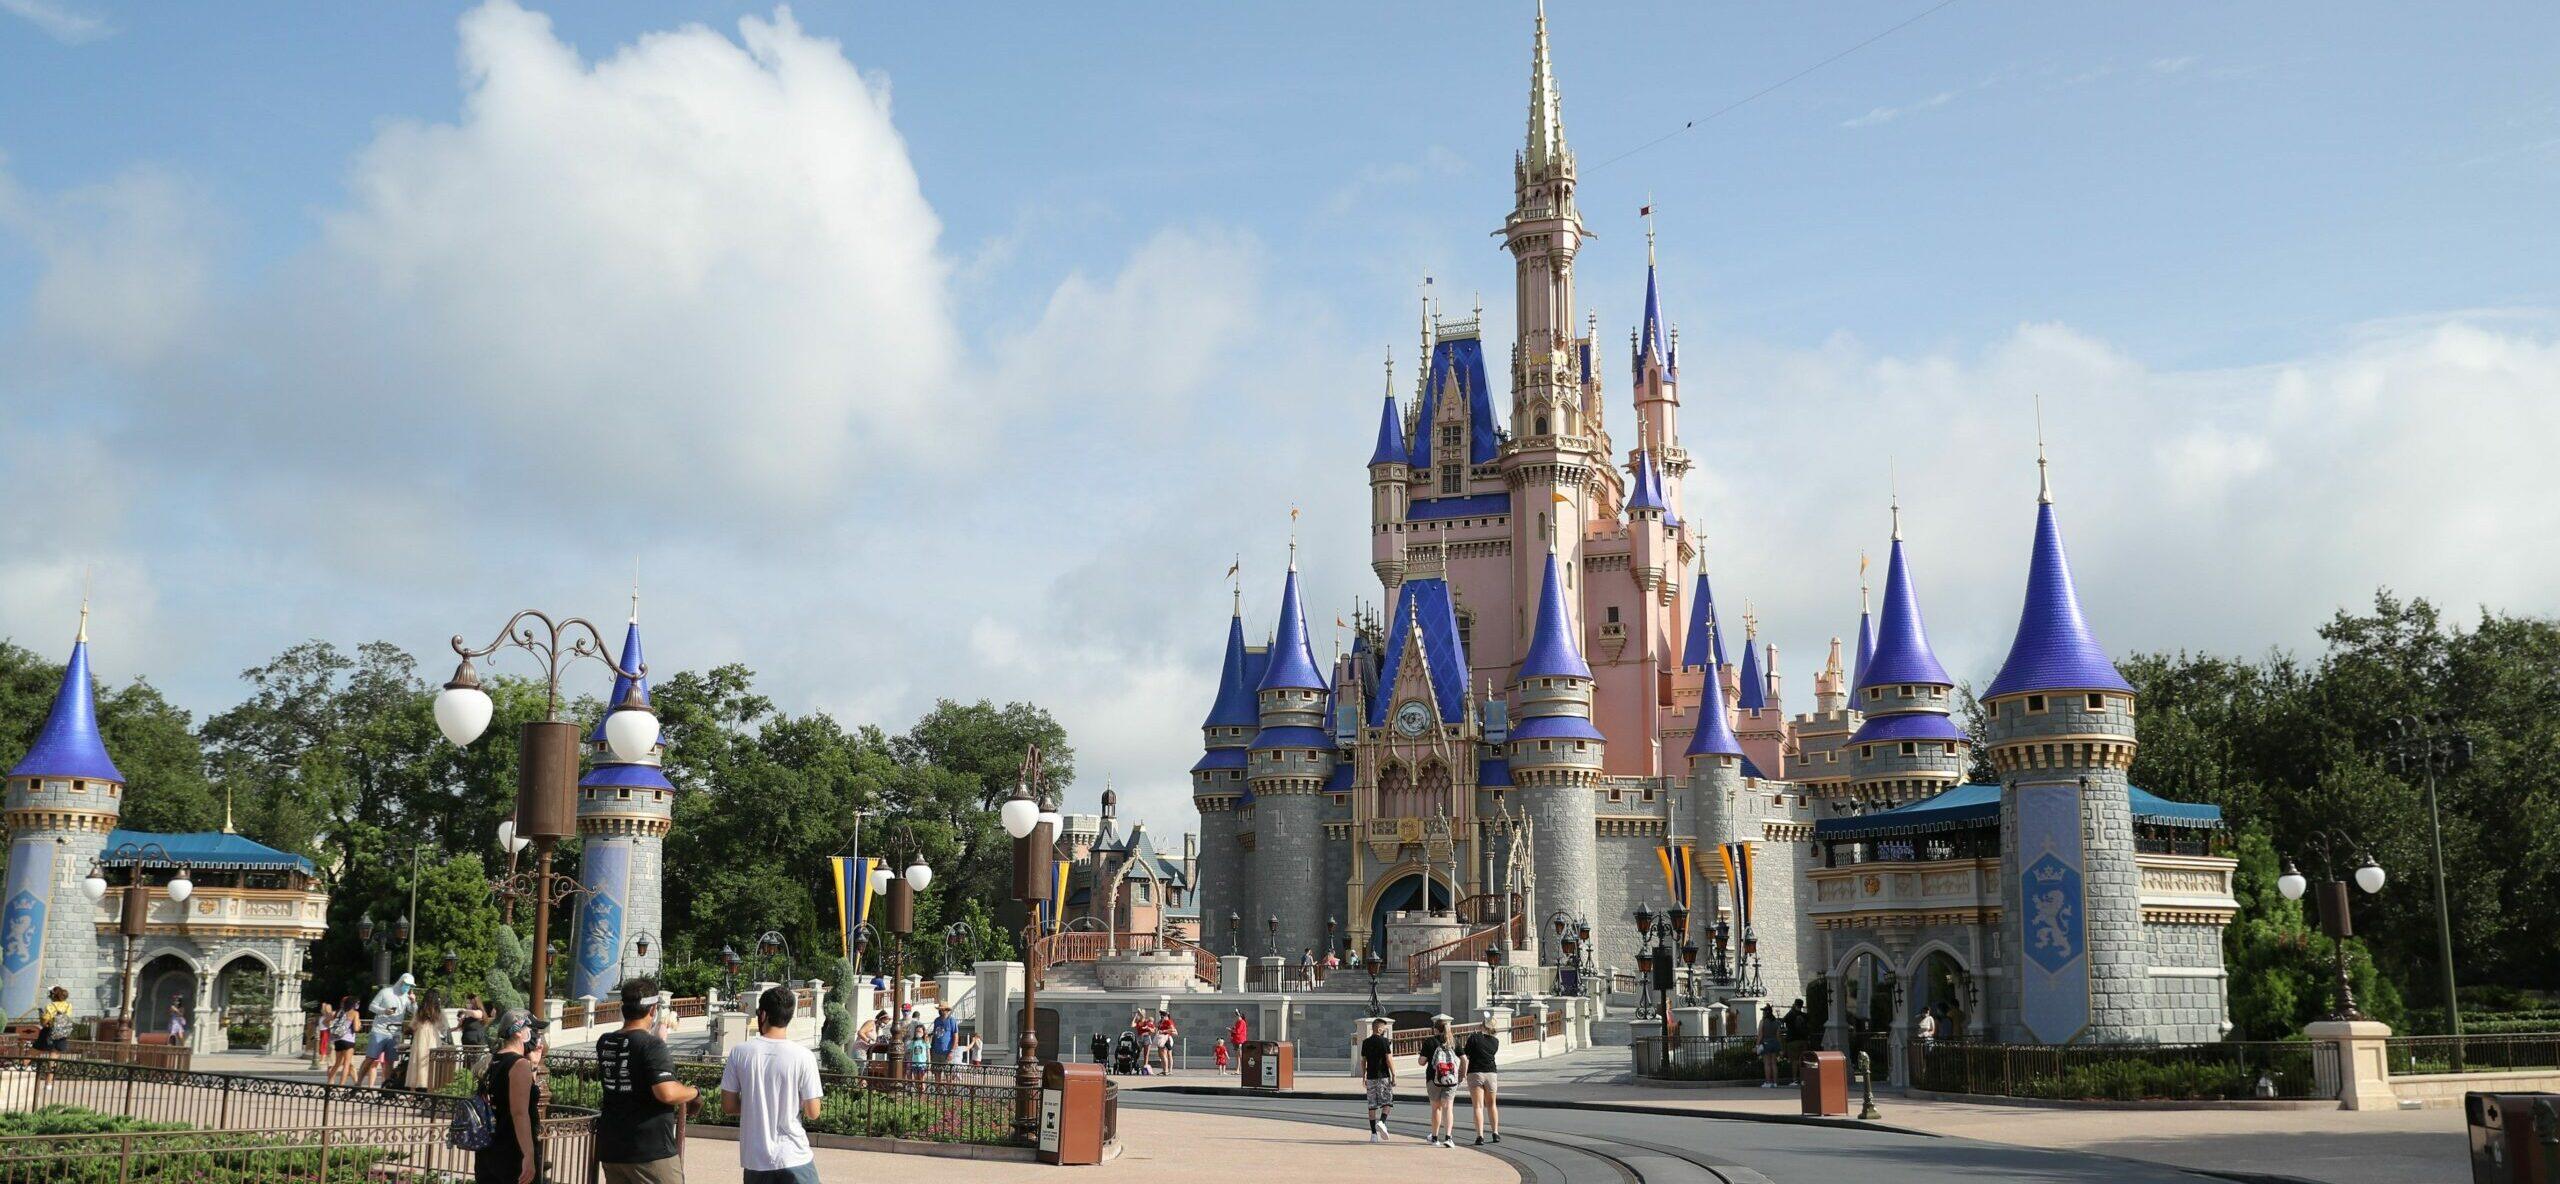 Walt Disney World Makes Major Change To Park Pass System For Select Guests!